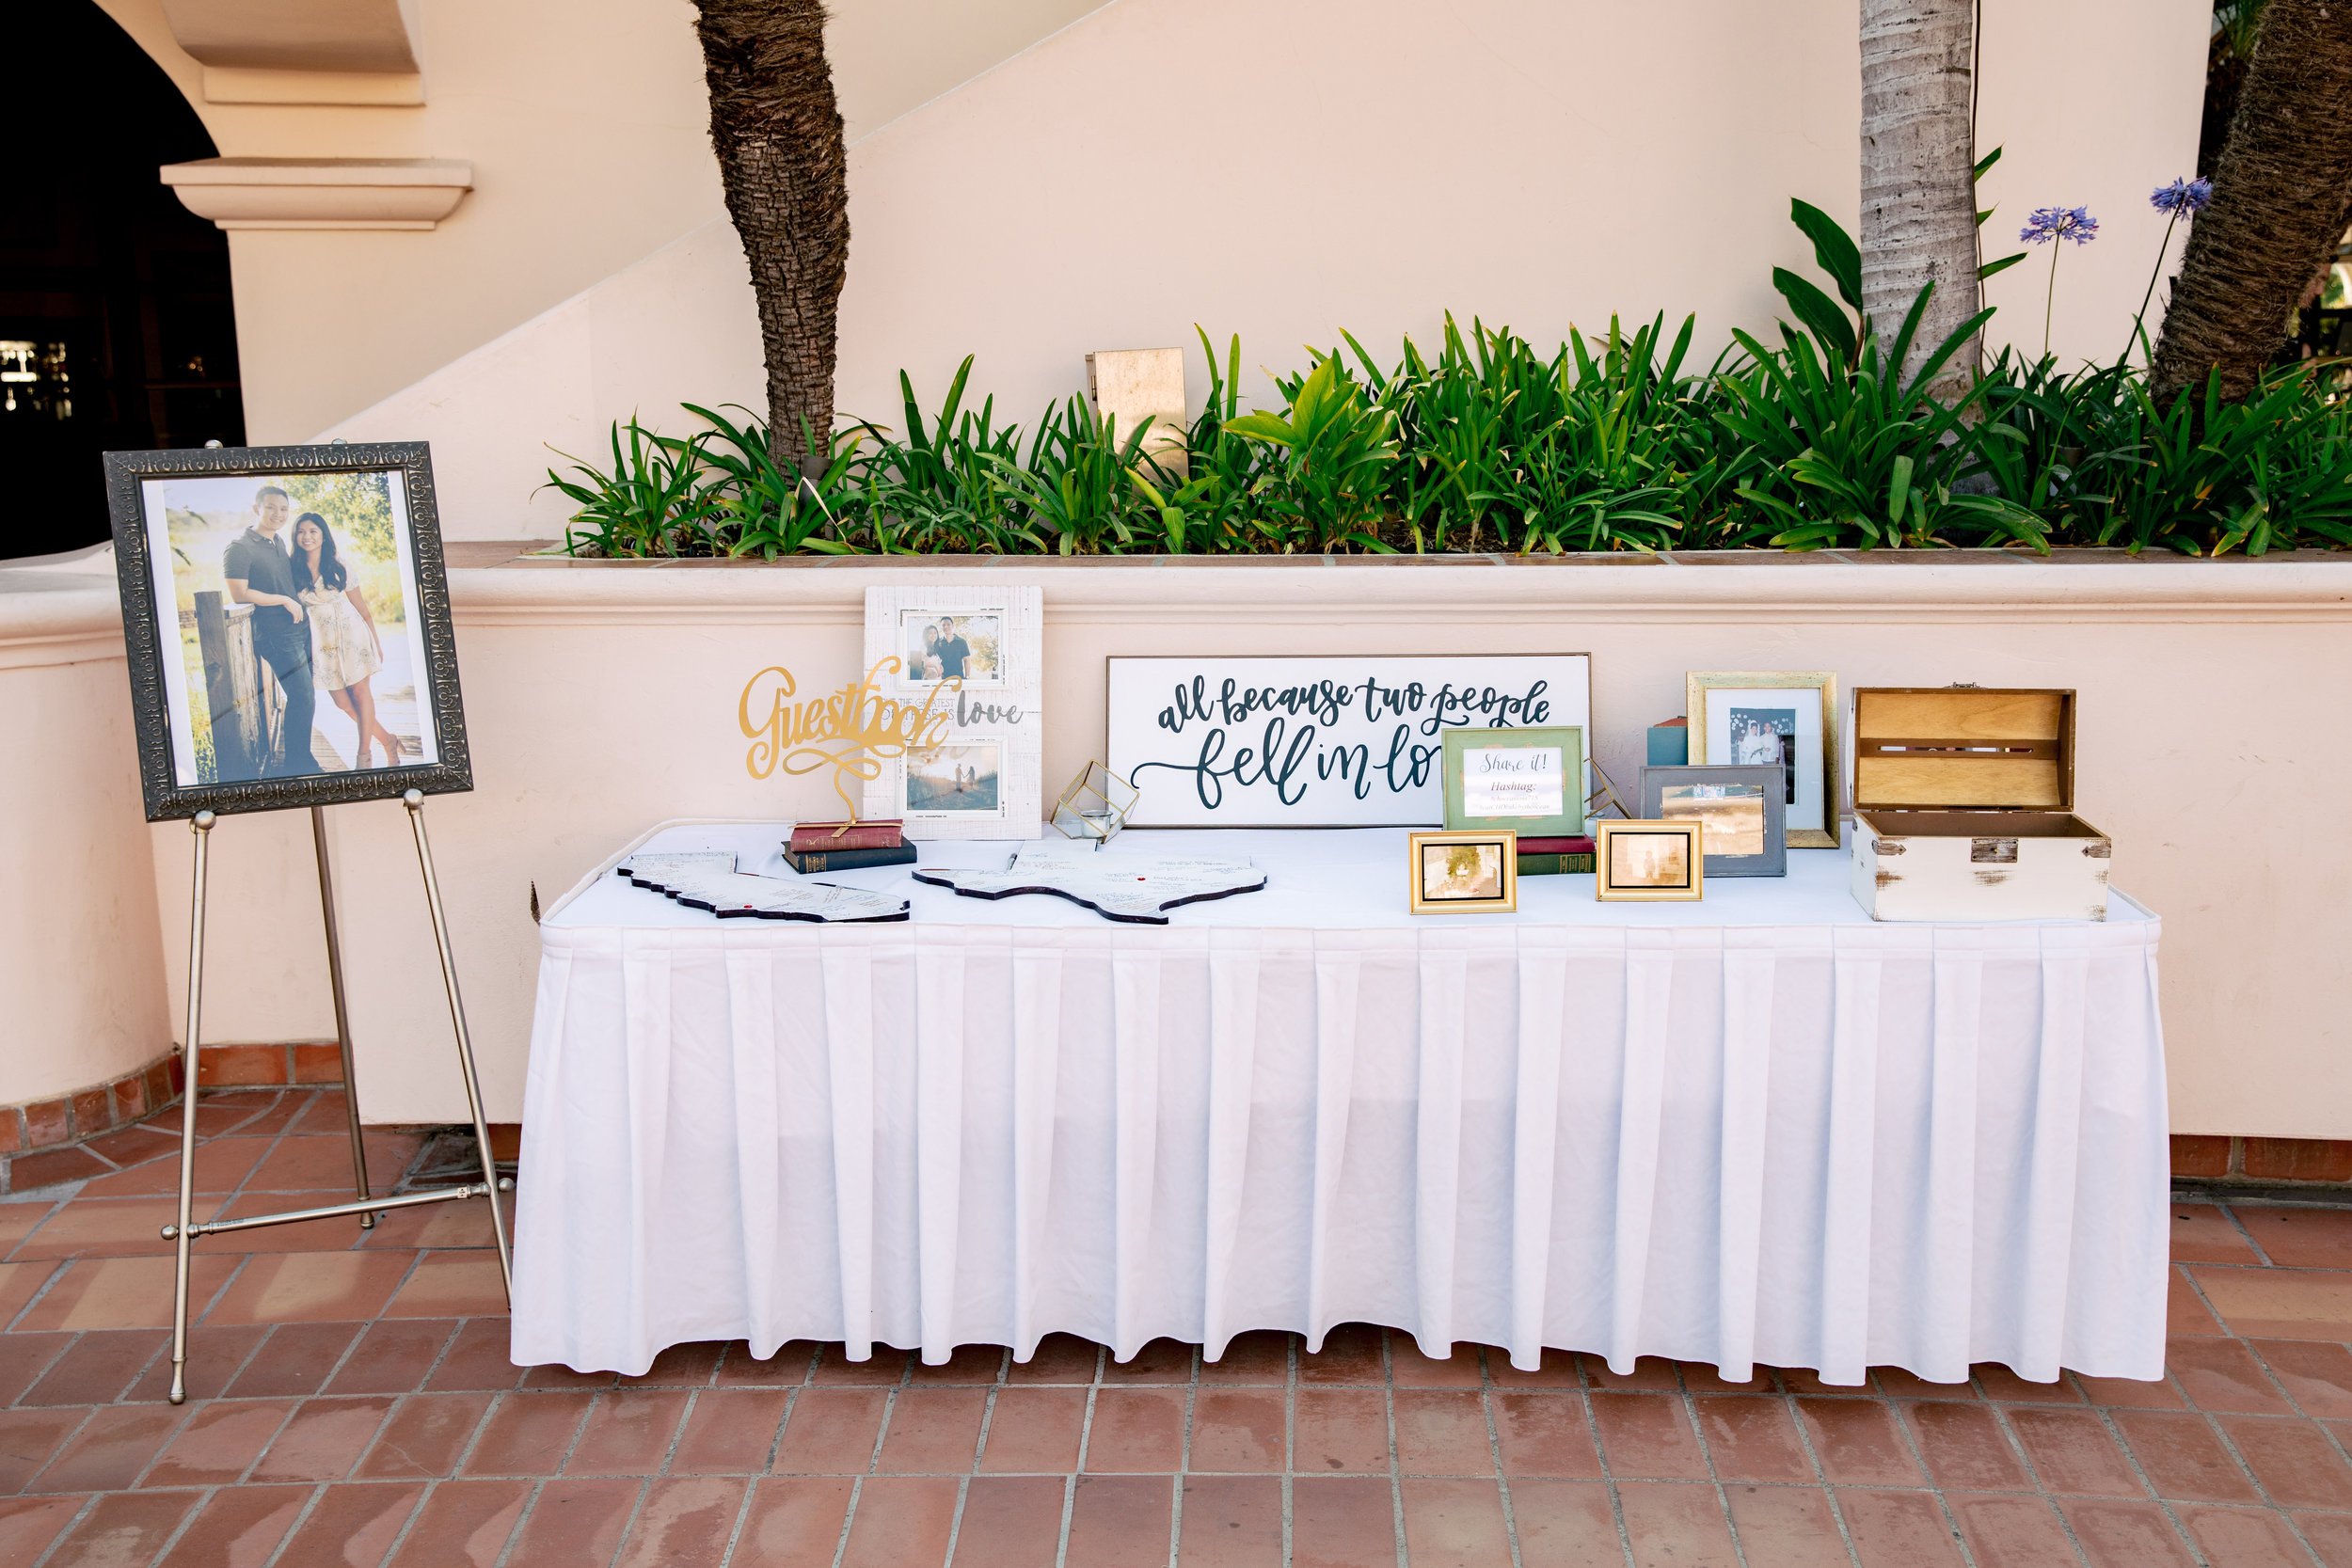 www.santabarbaraweddingstyle.com | Rewind Photography | Events by M and M | Hilton Santa Barbara | Guest Sign In table